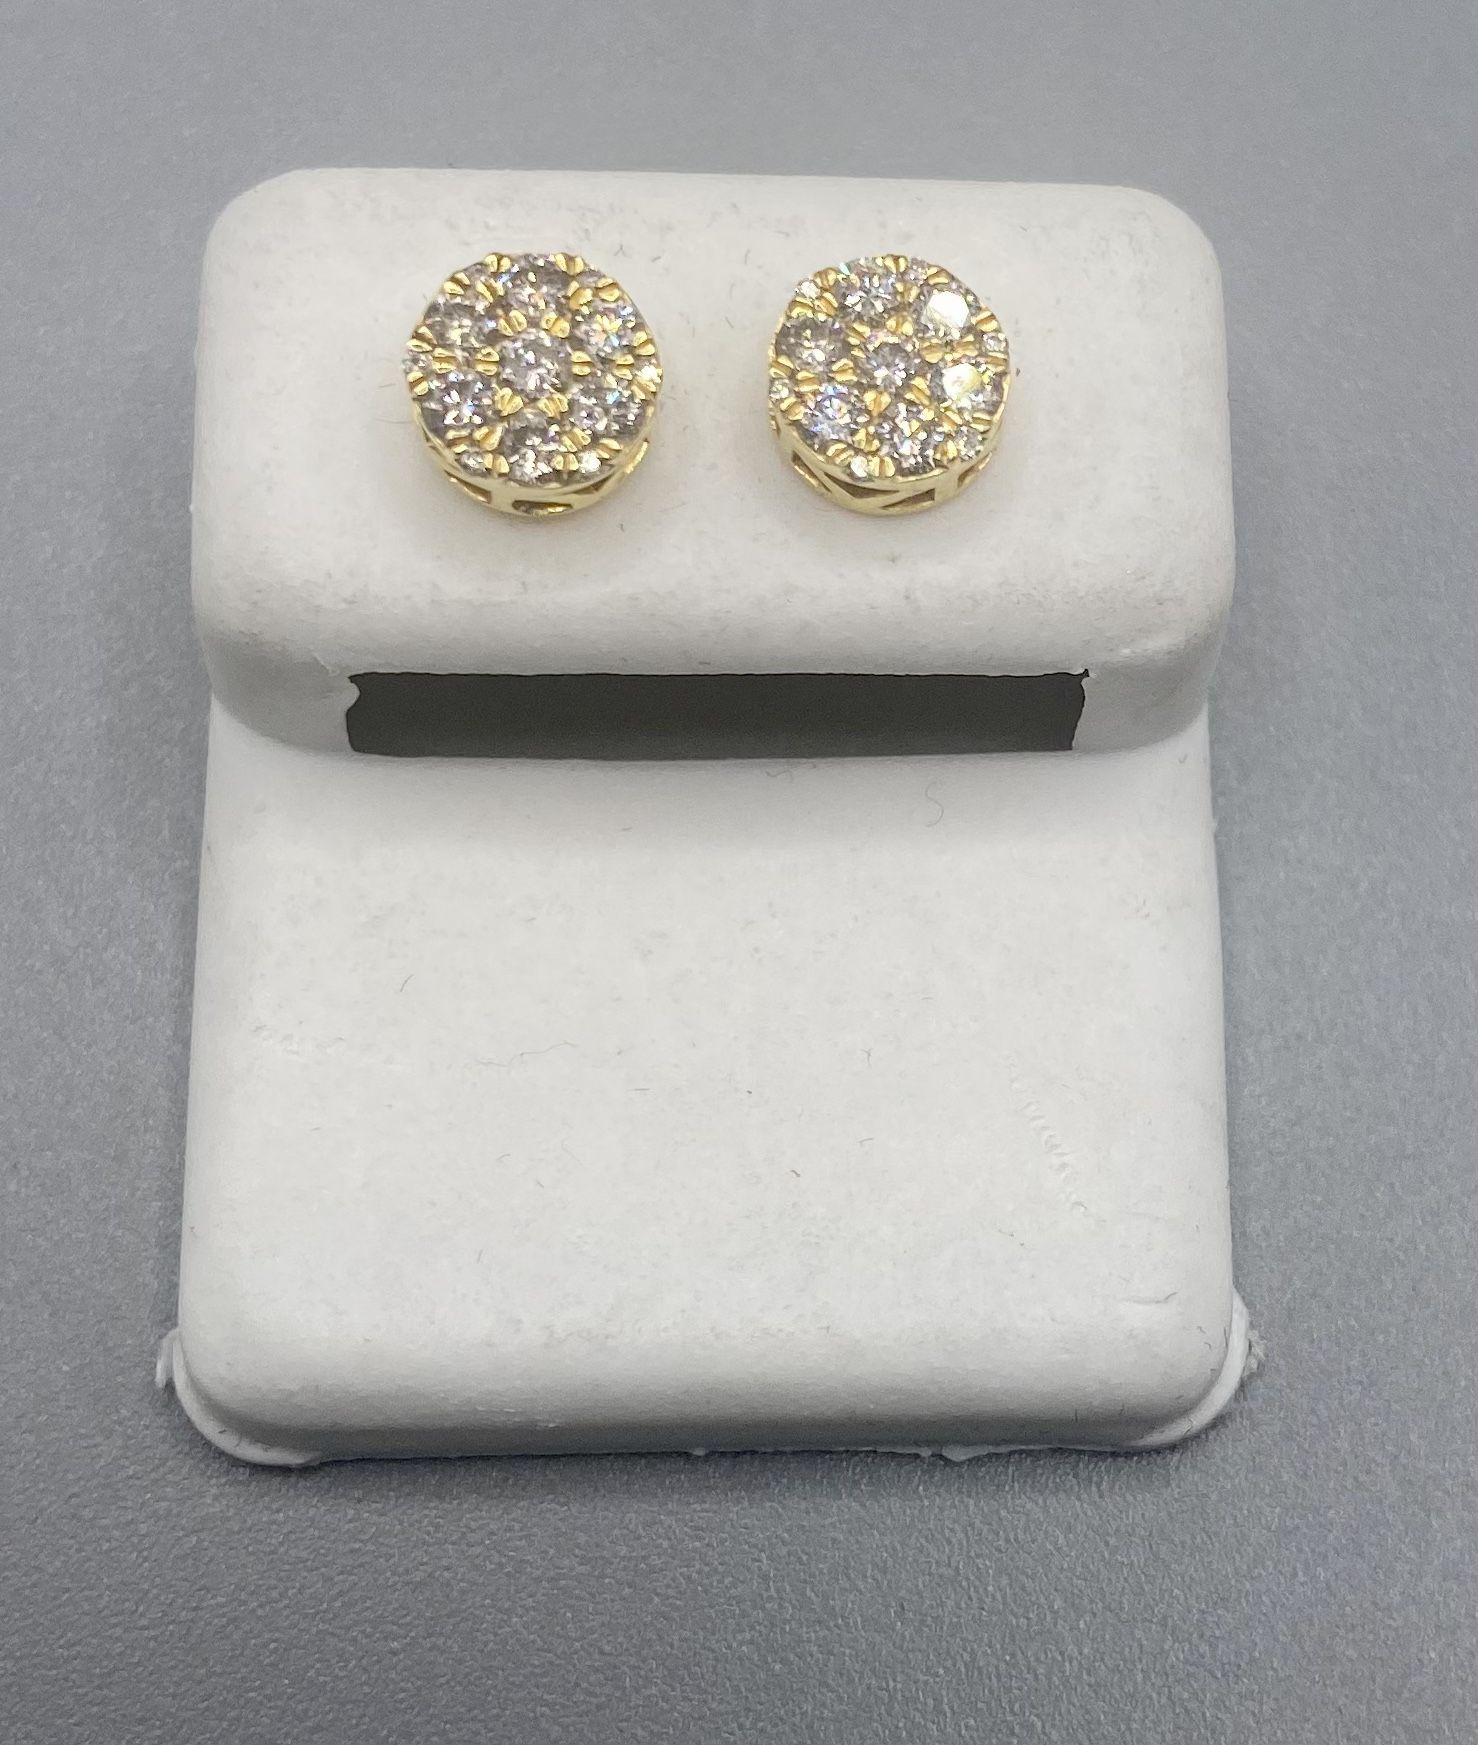 10KT Gold With Diamond Earrings 0.50 CTW